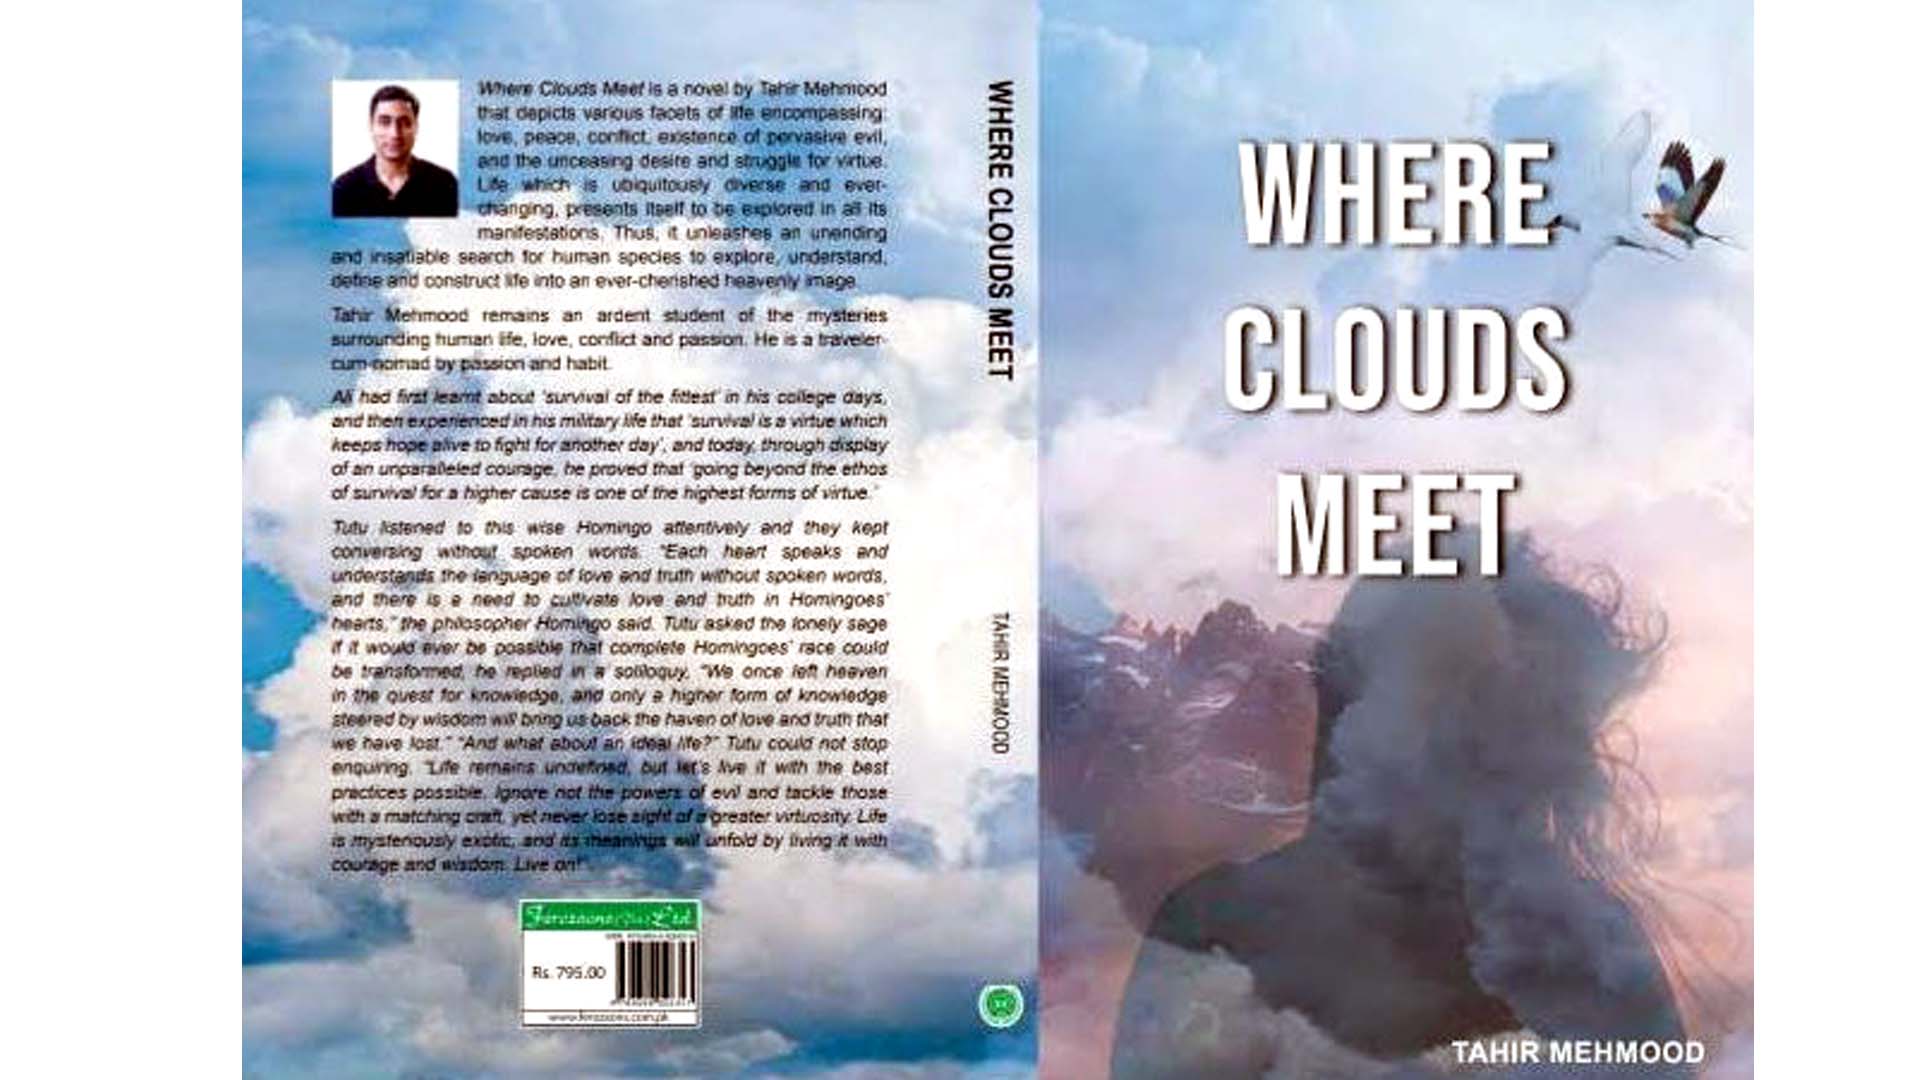 A review of the Book ‘Where Clouds Meet’